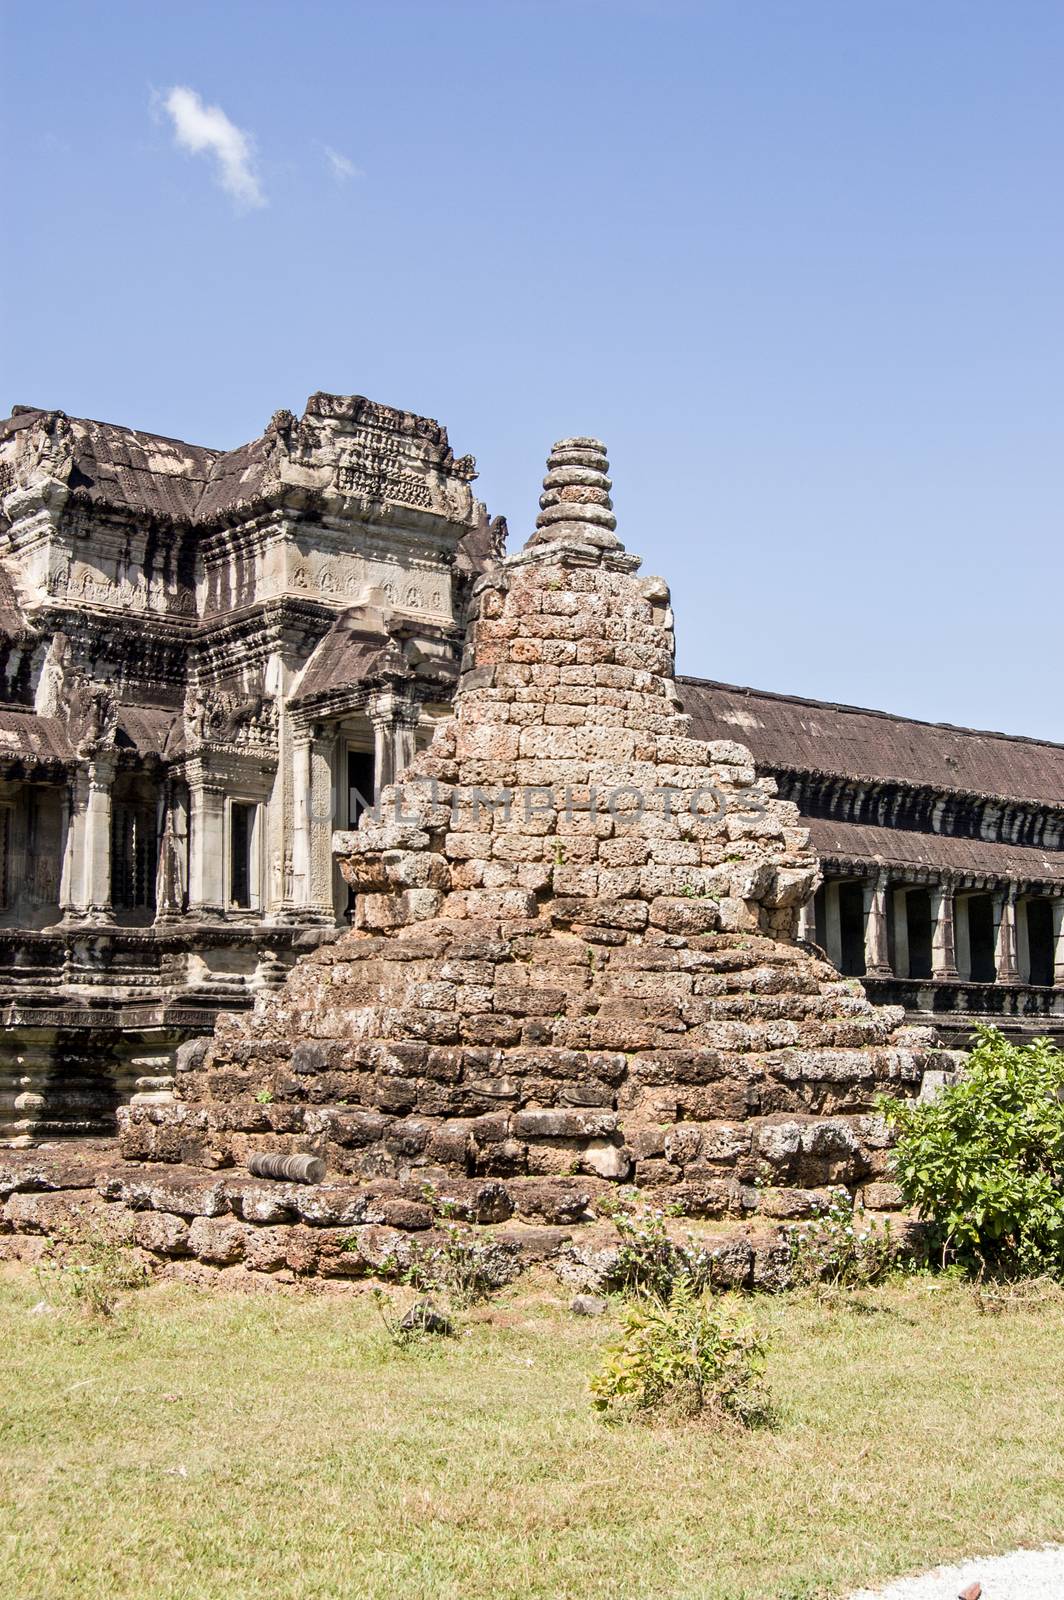 A ruined Buddhist stupa tower, probably containing a relic. Angkor Wat temple, Siem Reap, Cambodia.